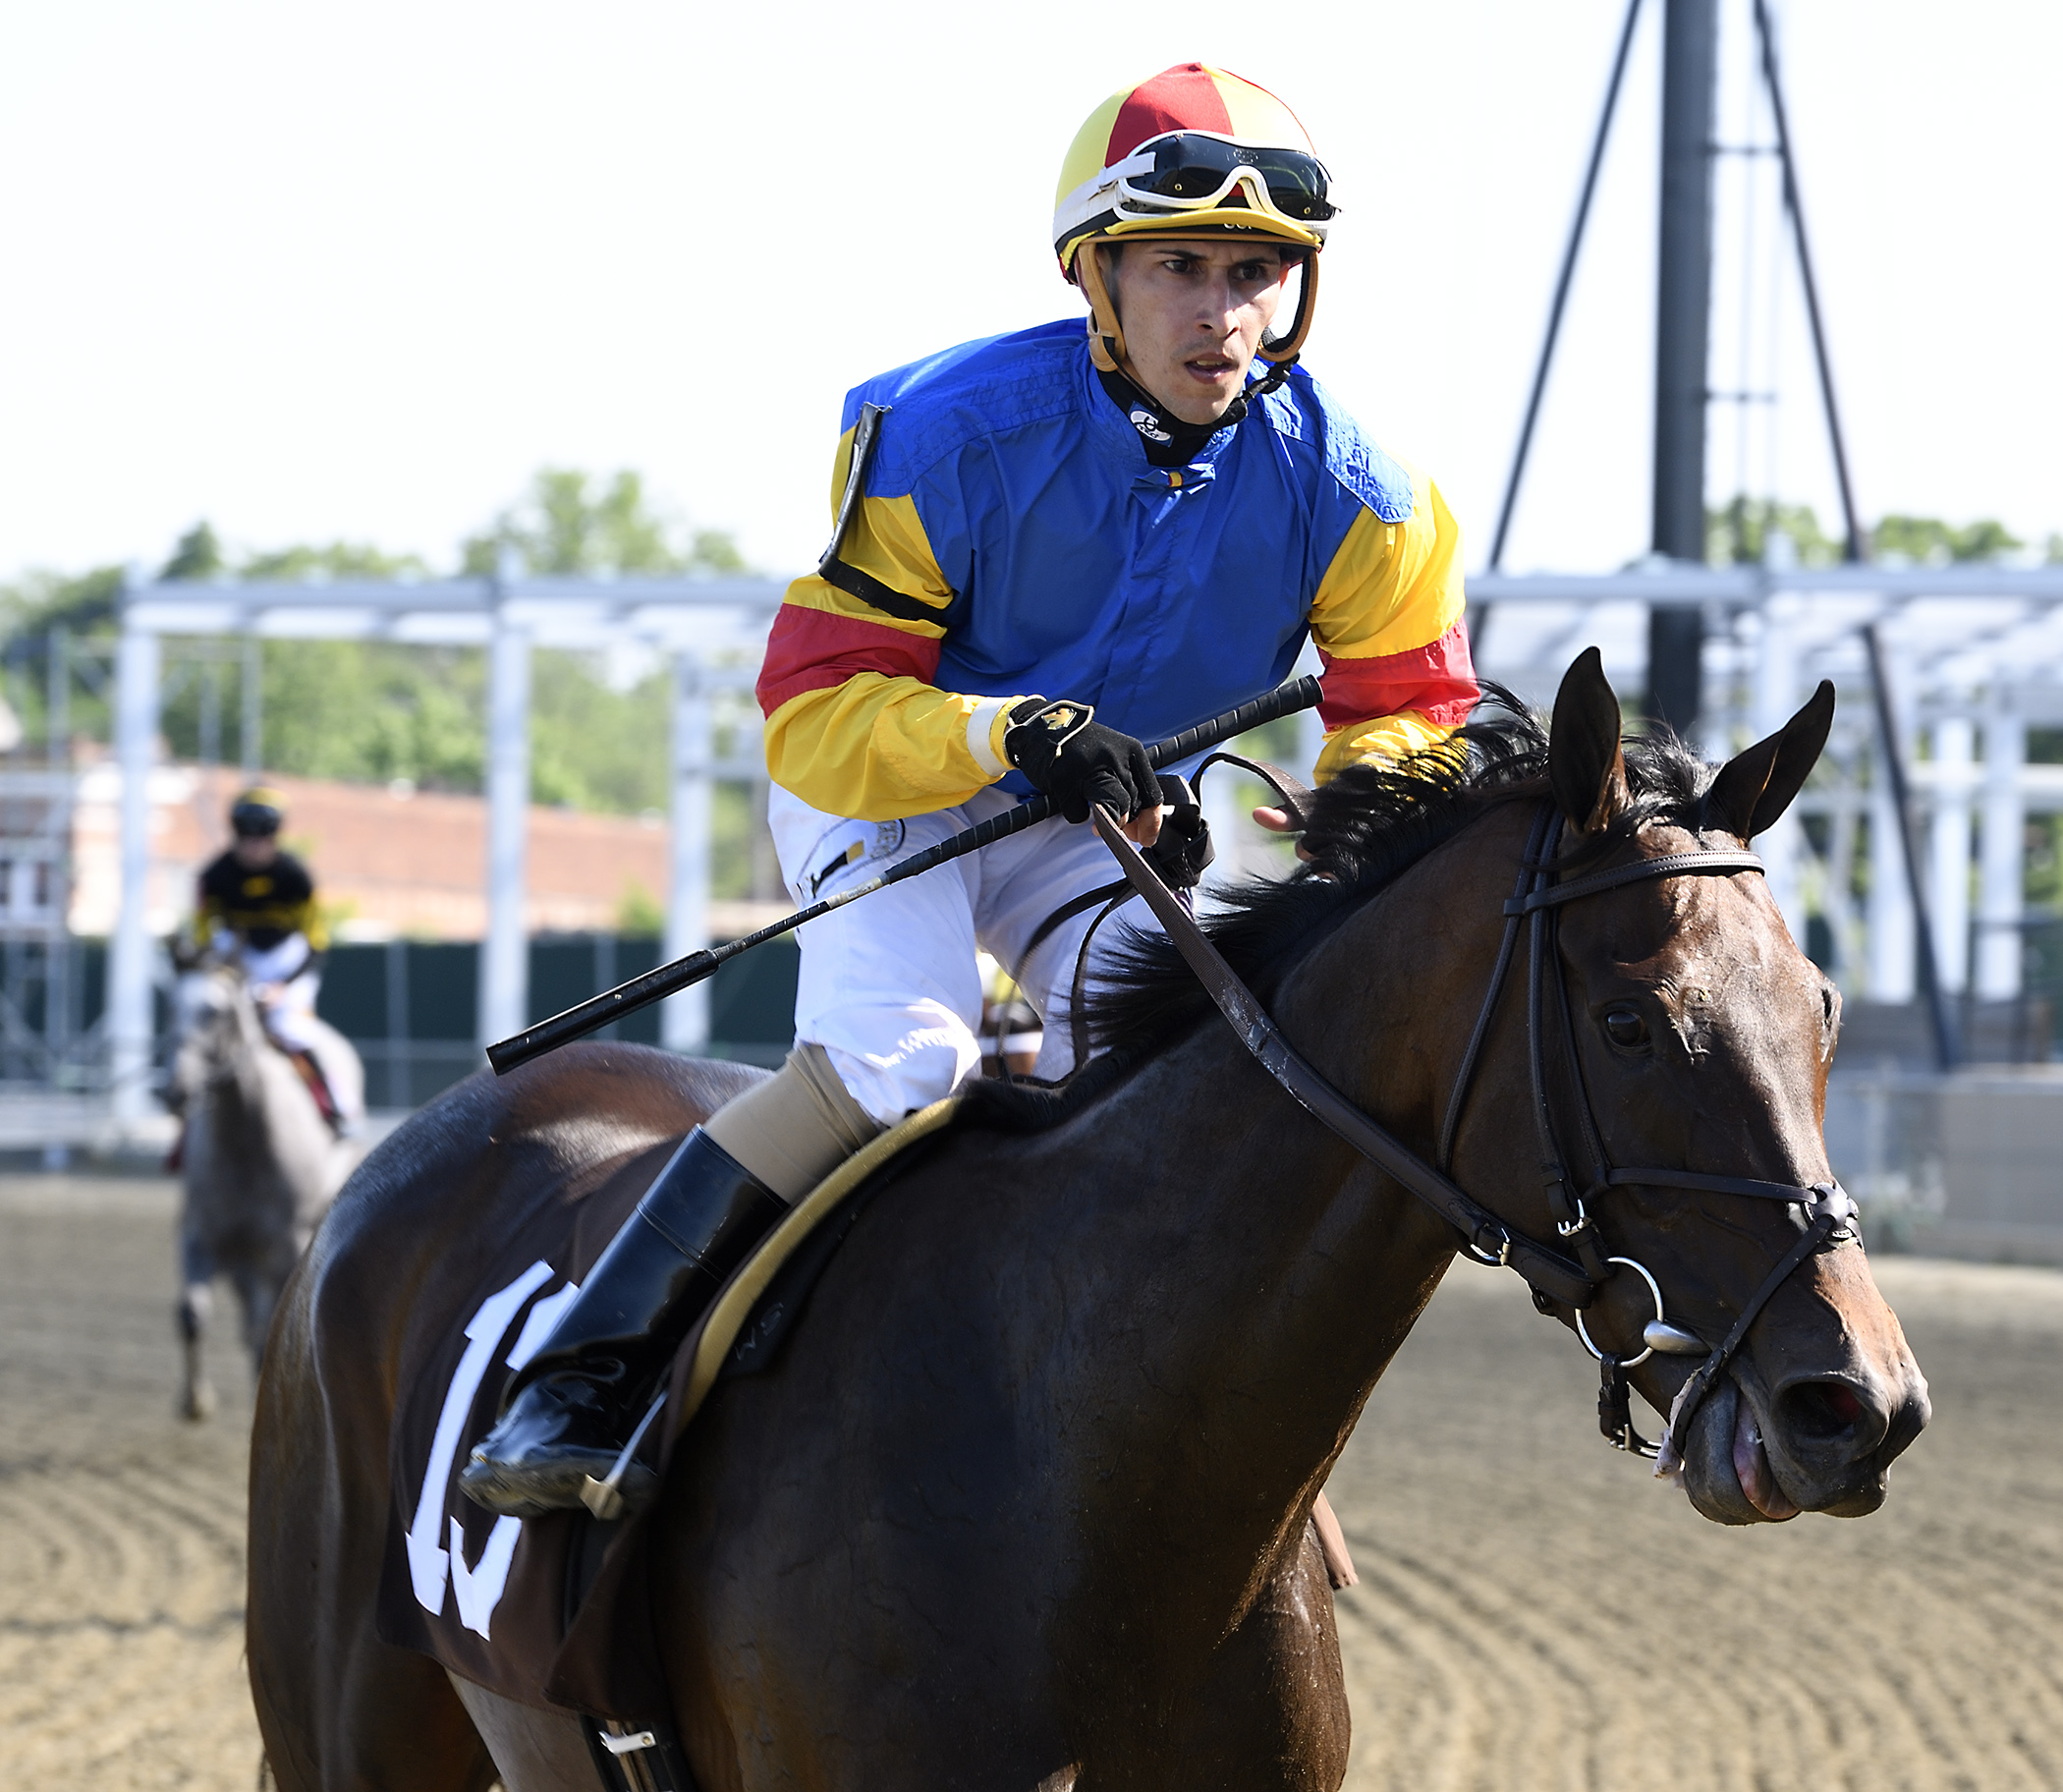 Jockey Alex Cintron was atop Queen Caroline in the June 25th Nellie Mae Cox Stakes. Photo by Jim McCue.